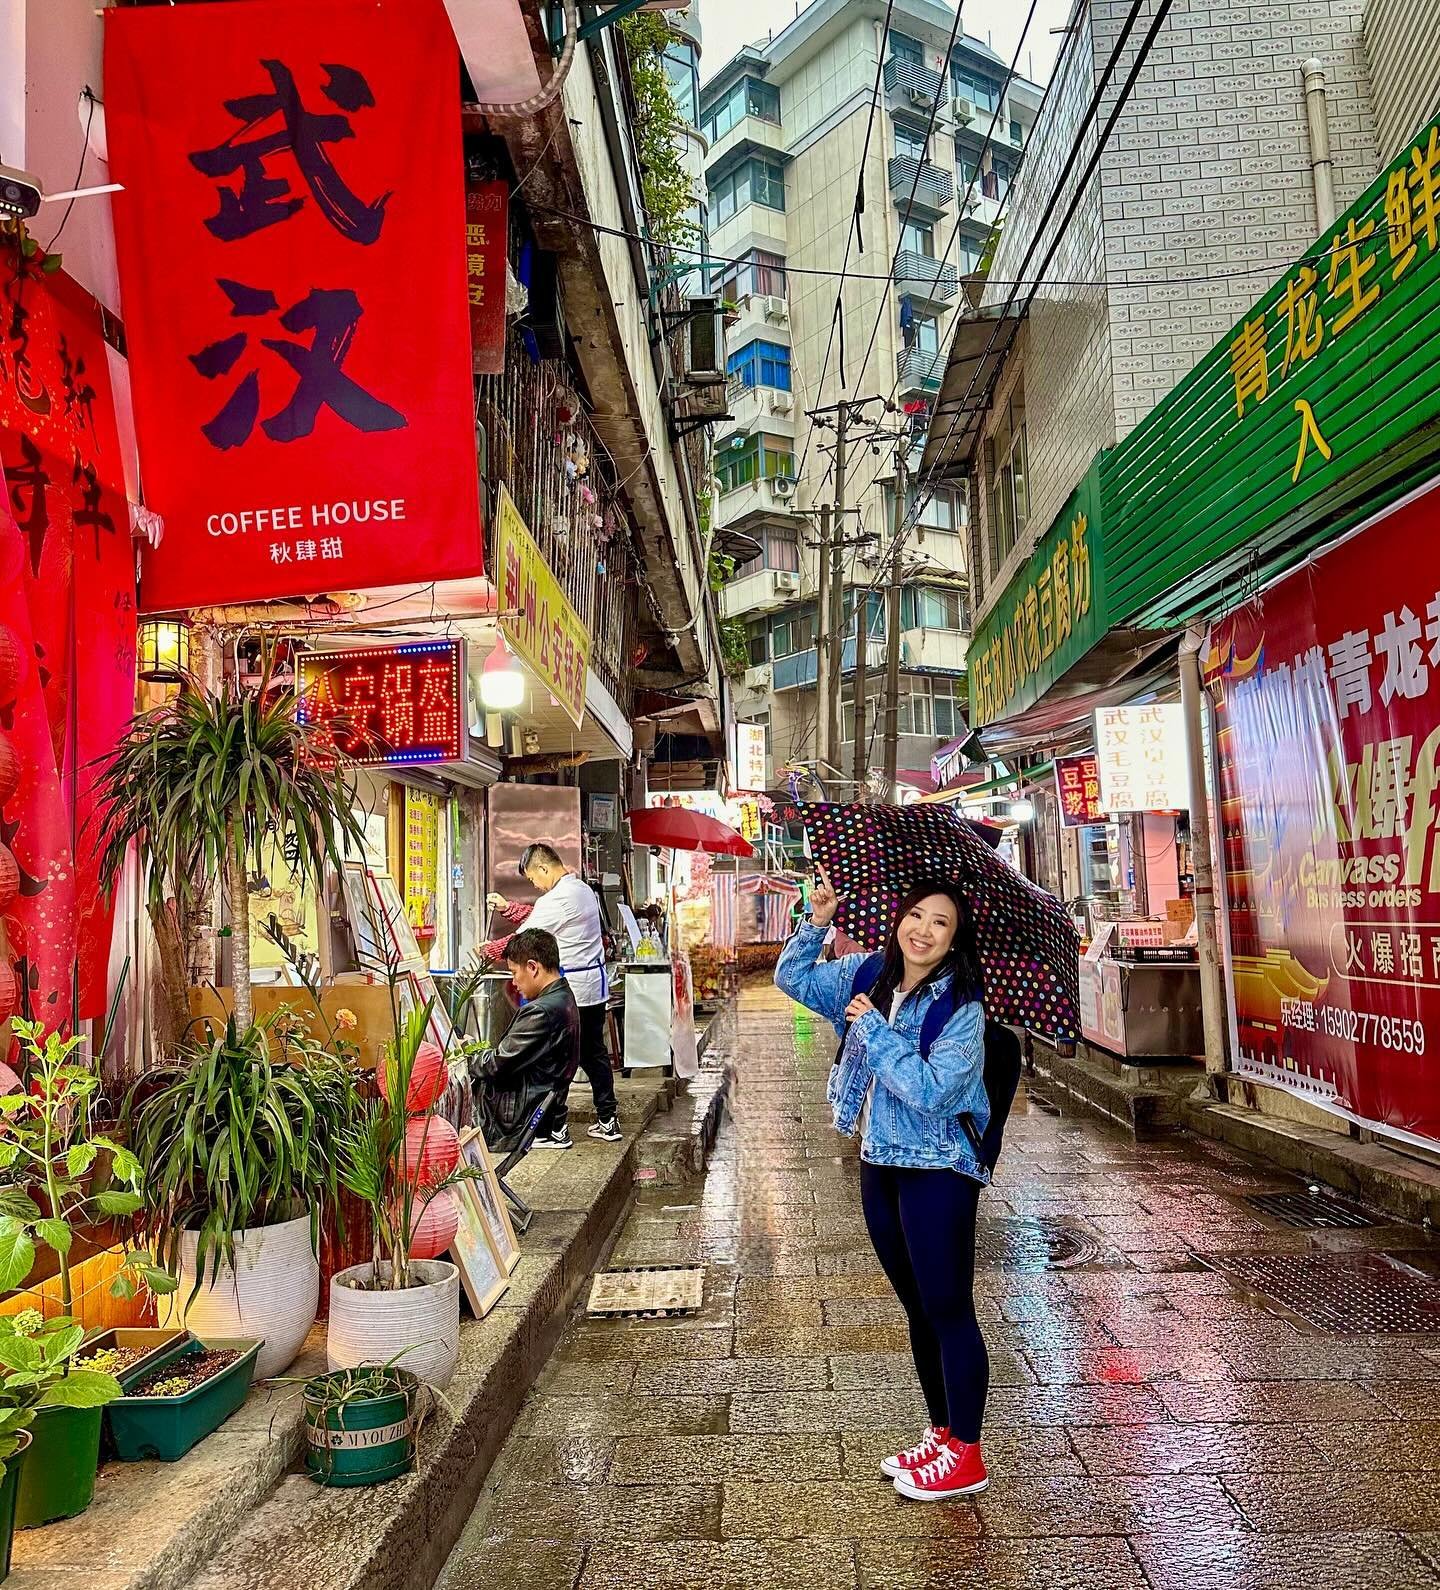 Rainy day in Wuhan checking out all the best food spots. Love the delicious Wuhan style street food and hustle and bustle of this vibrant city!

Met a young Chinese college student who&rsquo;s solo traveling for the first time and ended up spending t